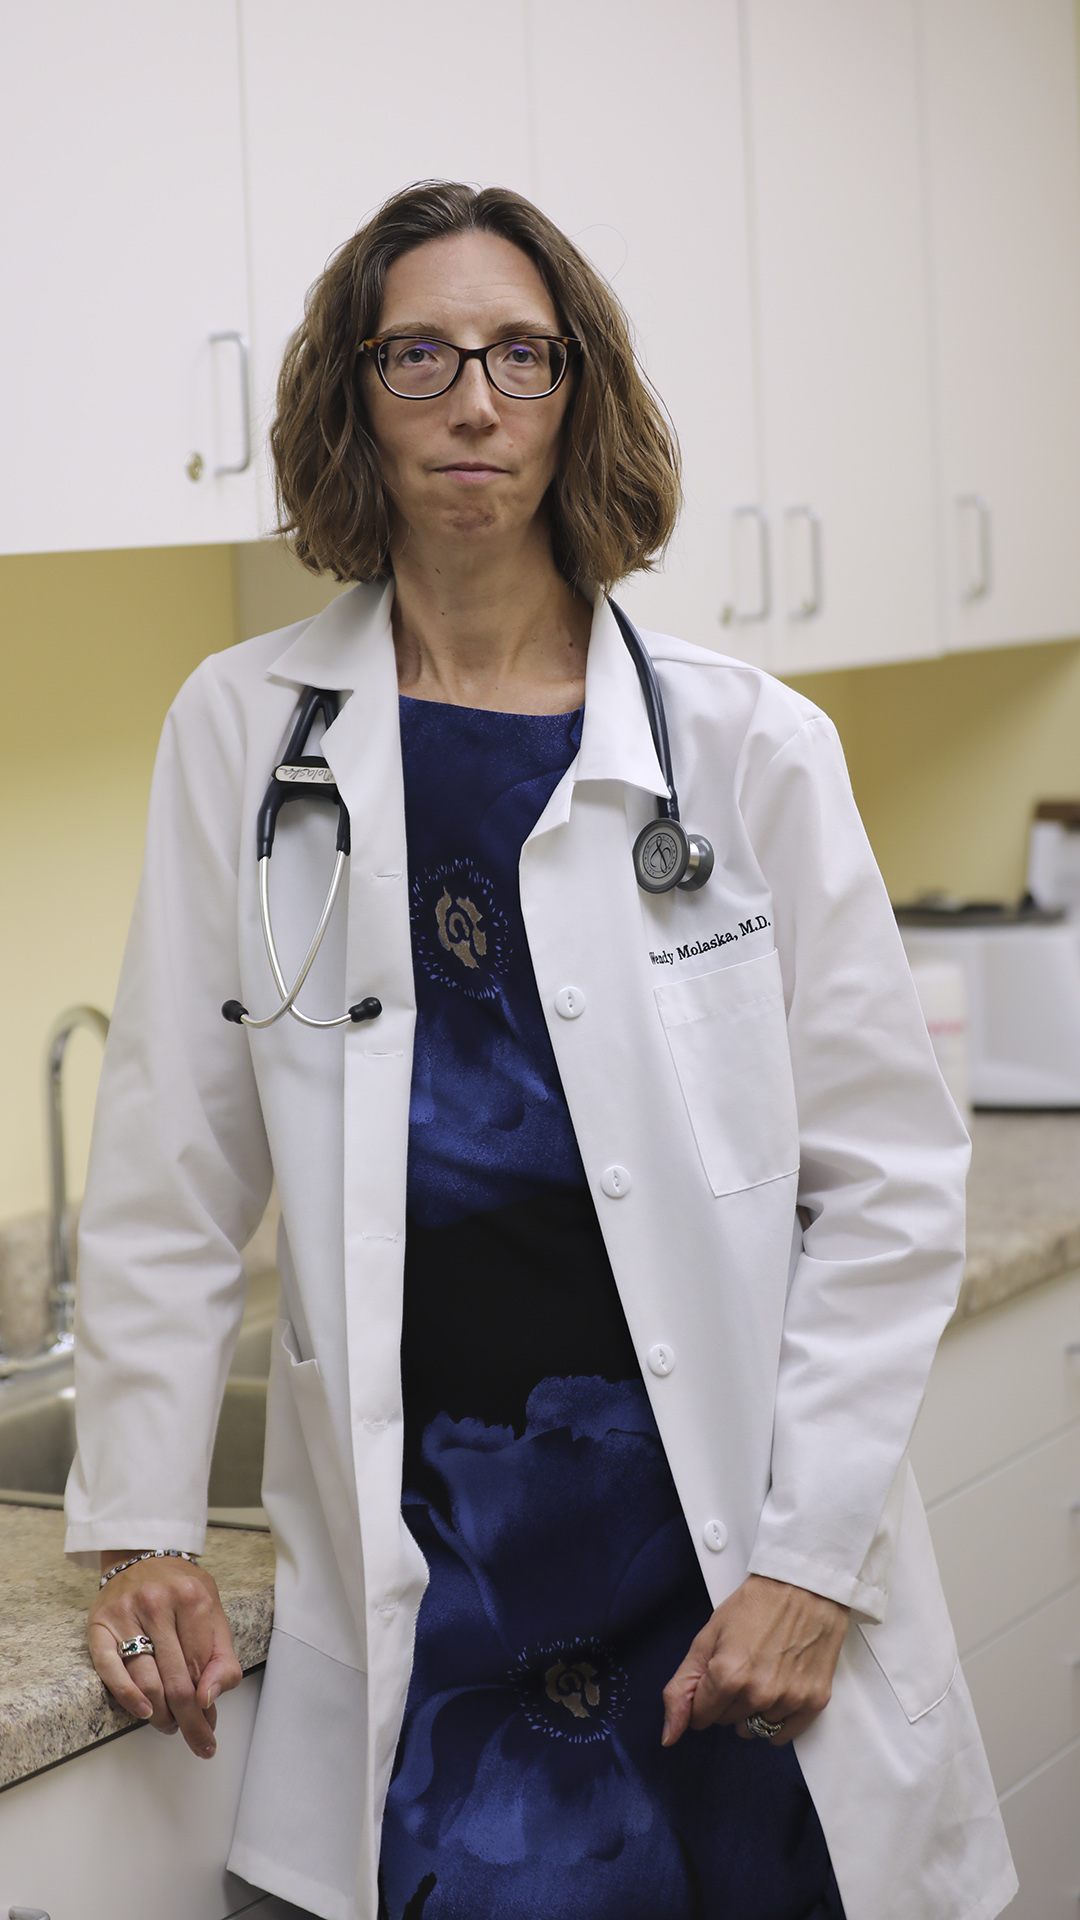 Wendy Molaska stands next to a counter in a medical office, with white cabinets and a sink in the background.